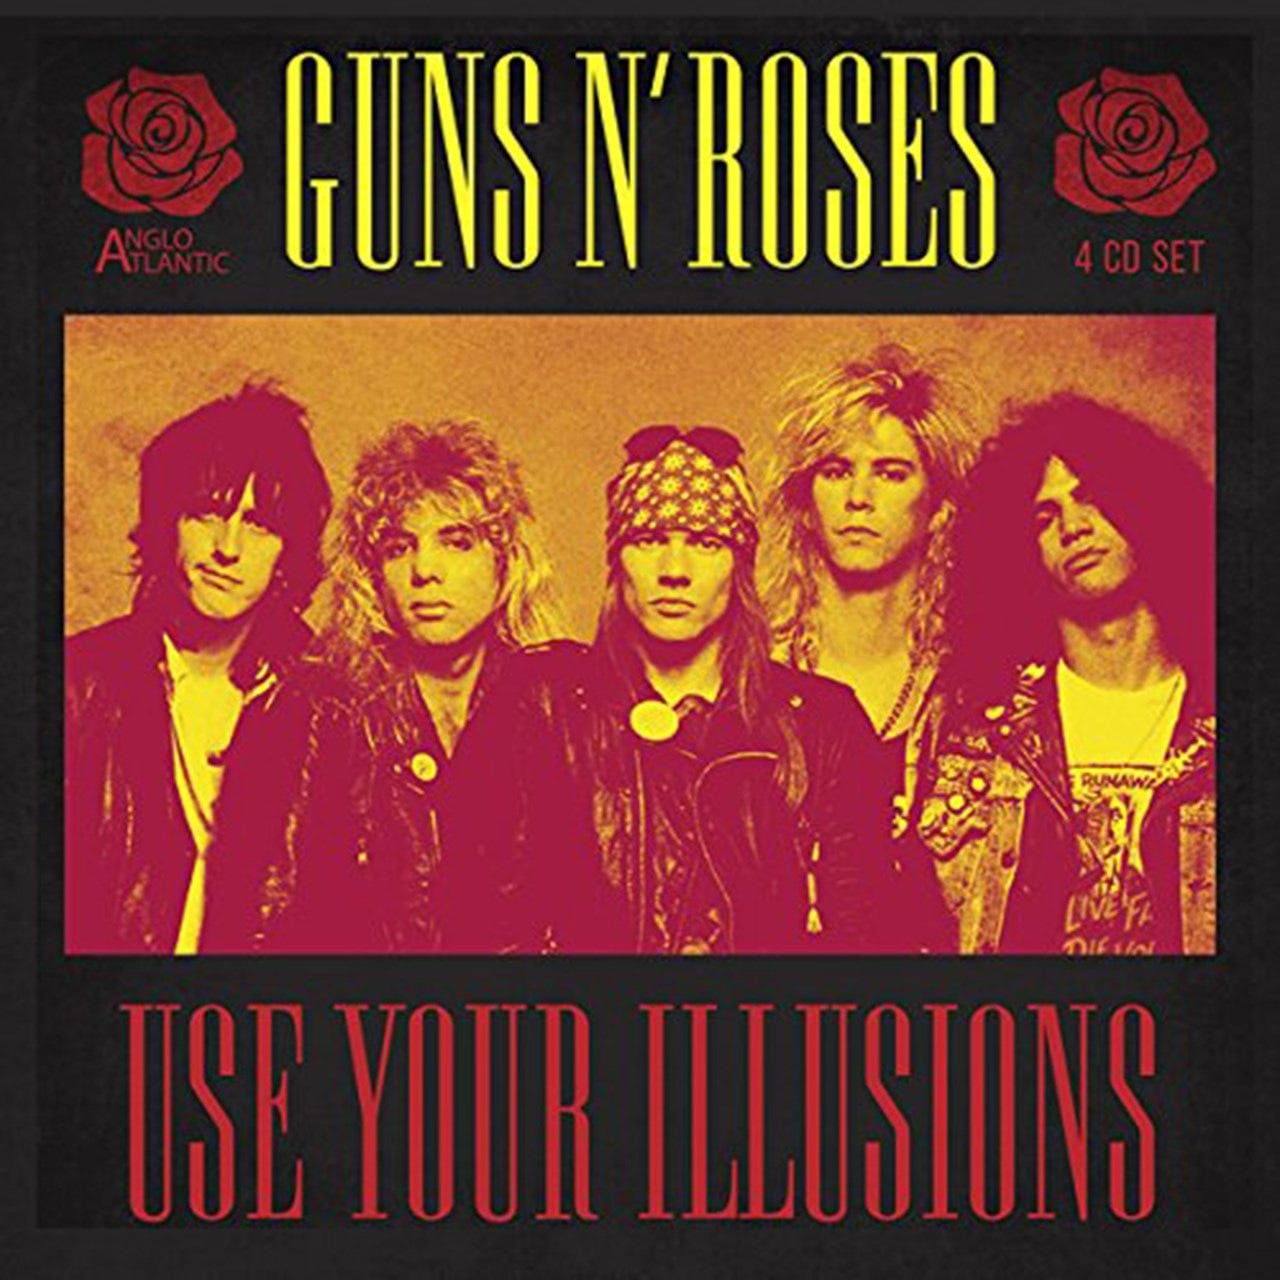 Use Your Illusions | CD Album | Free shipping over £20 | HMV Store